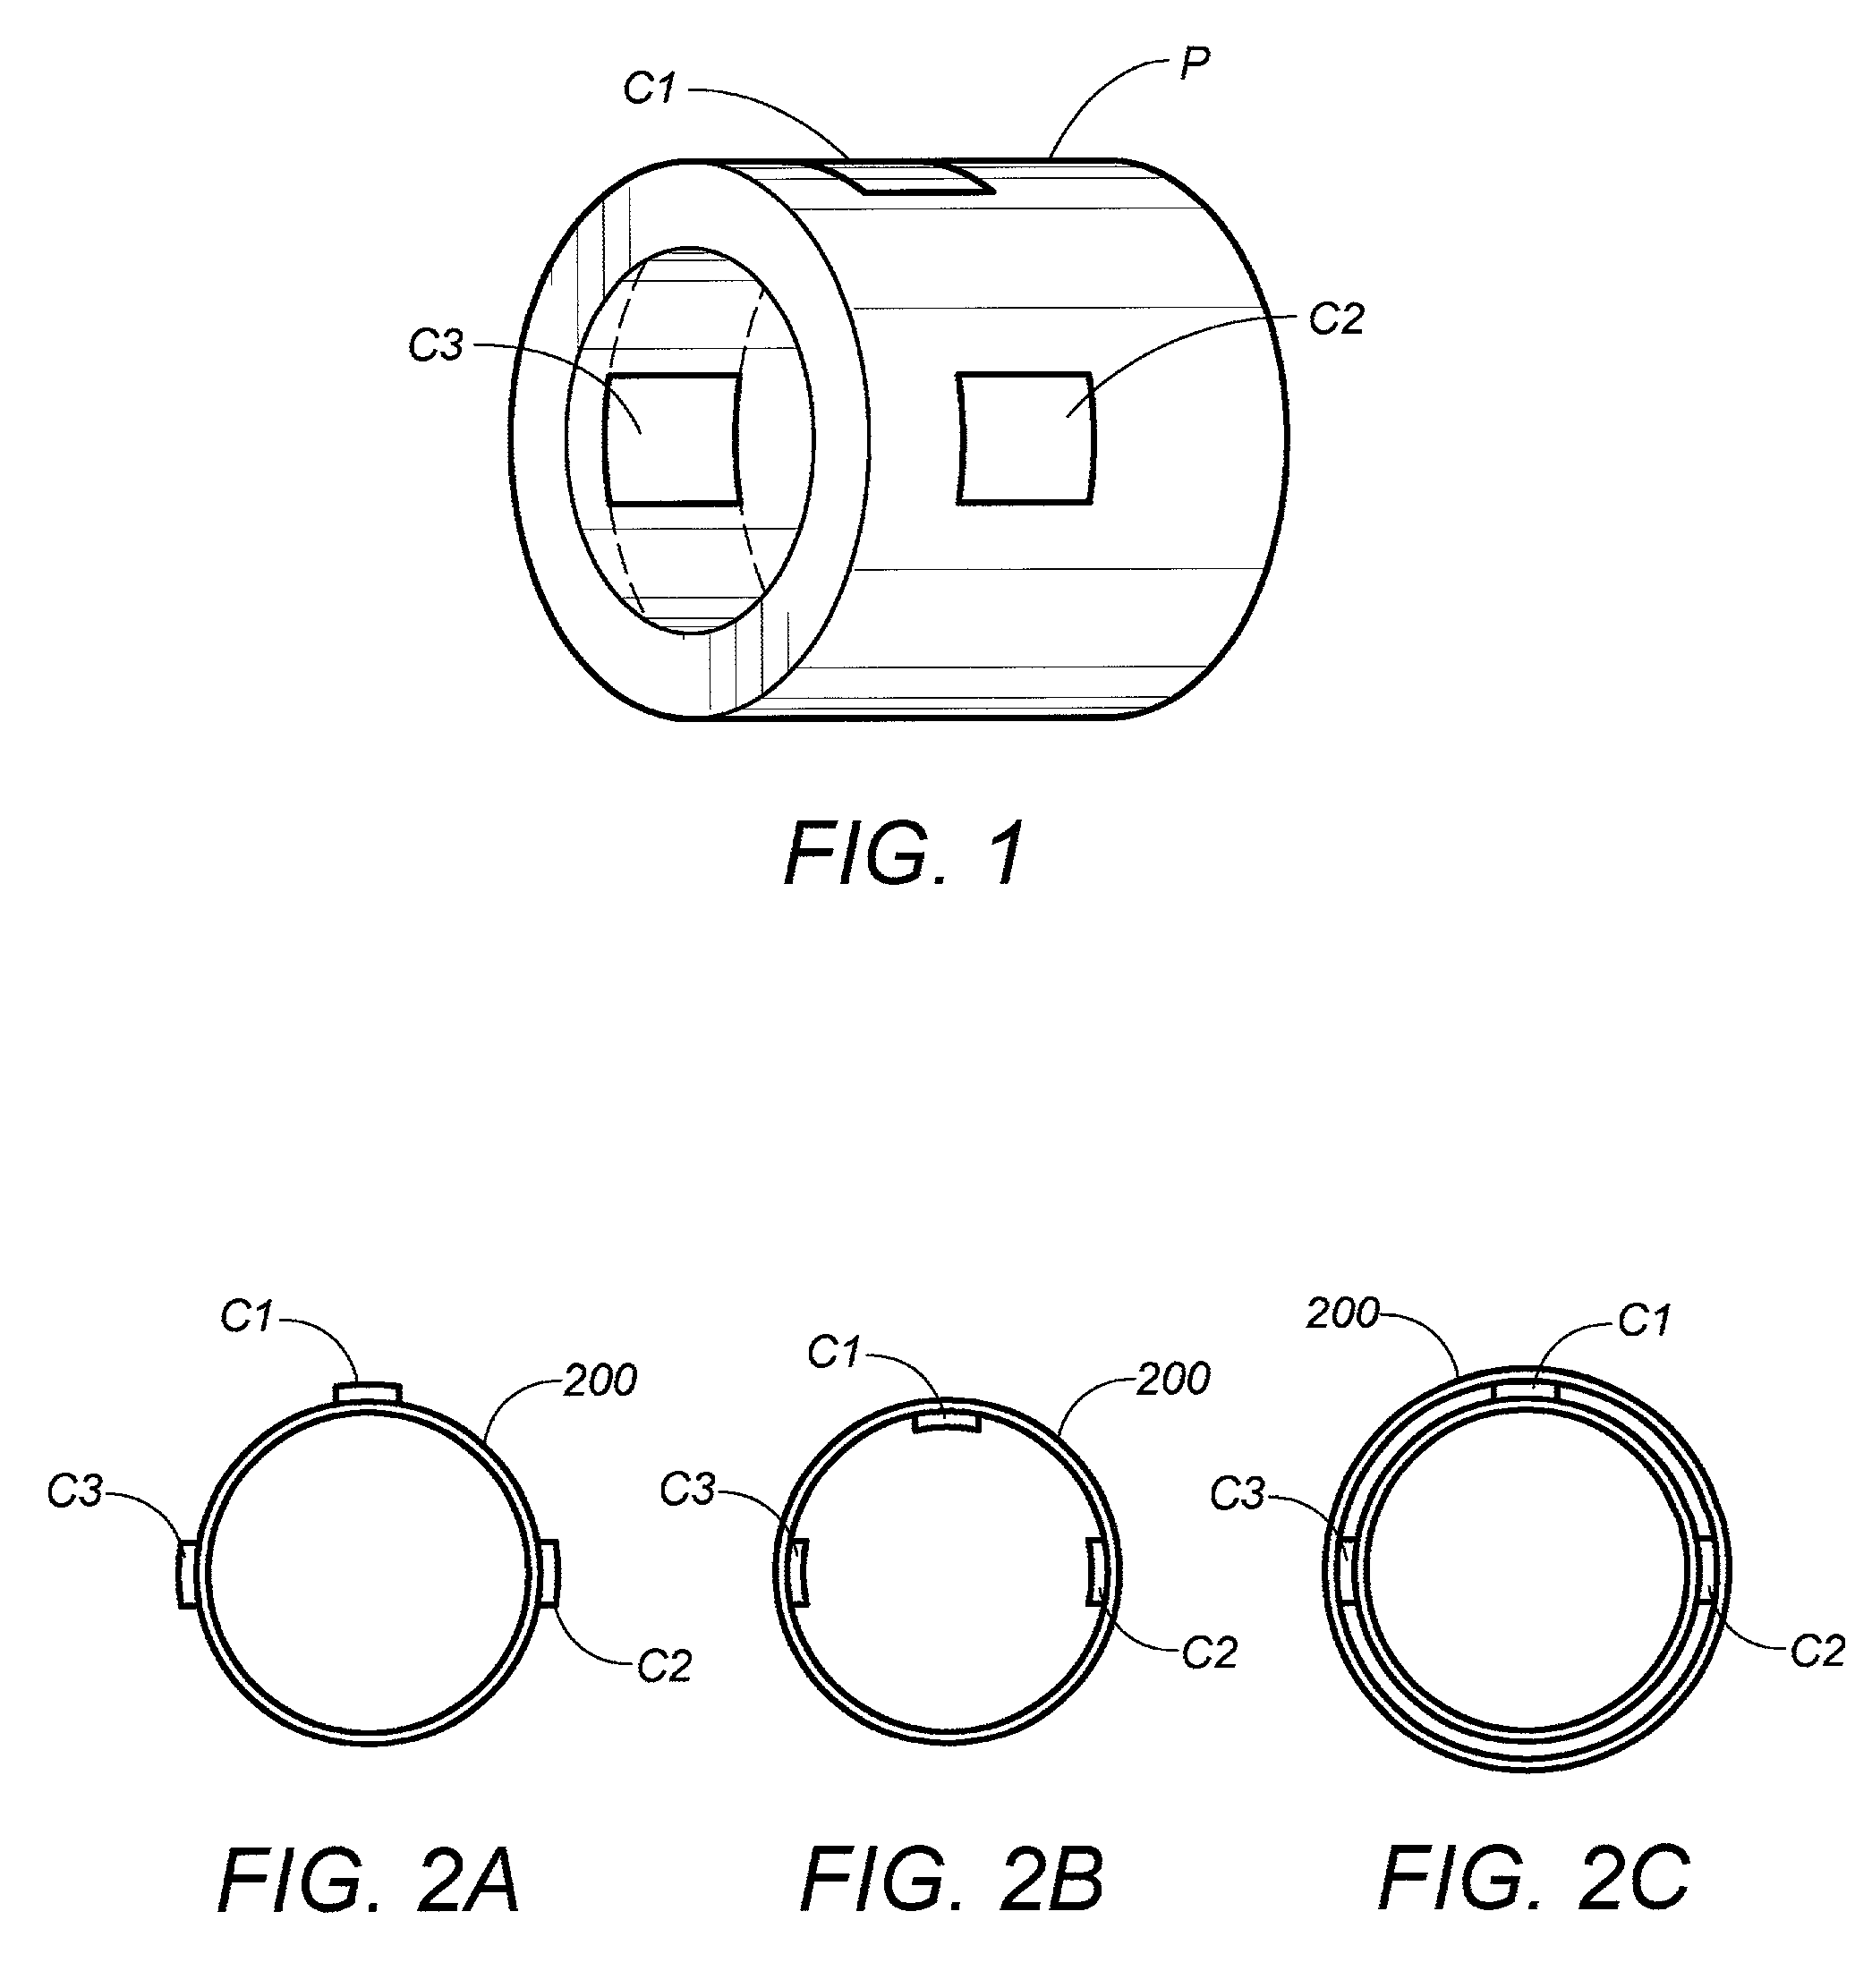 Pipeline identification and positioning system